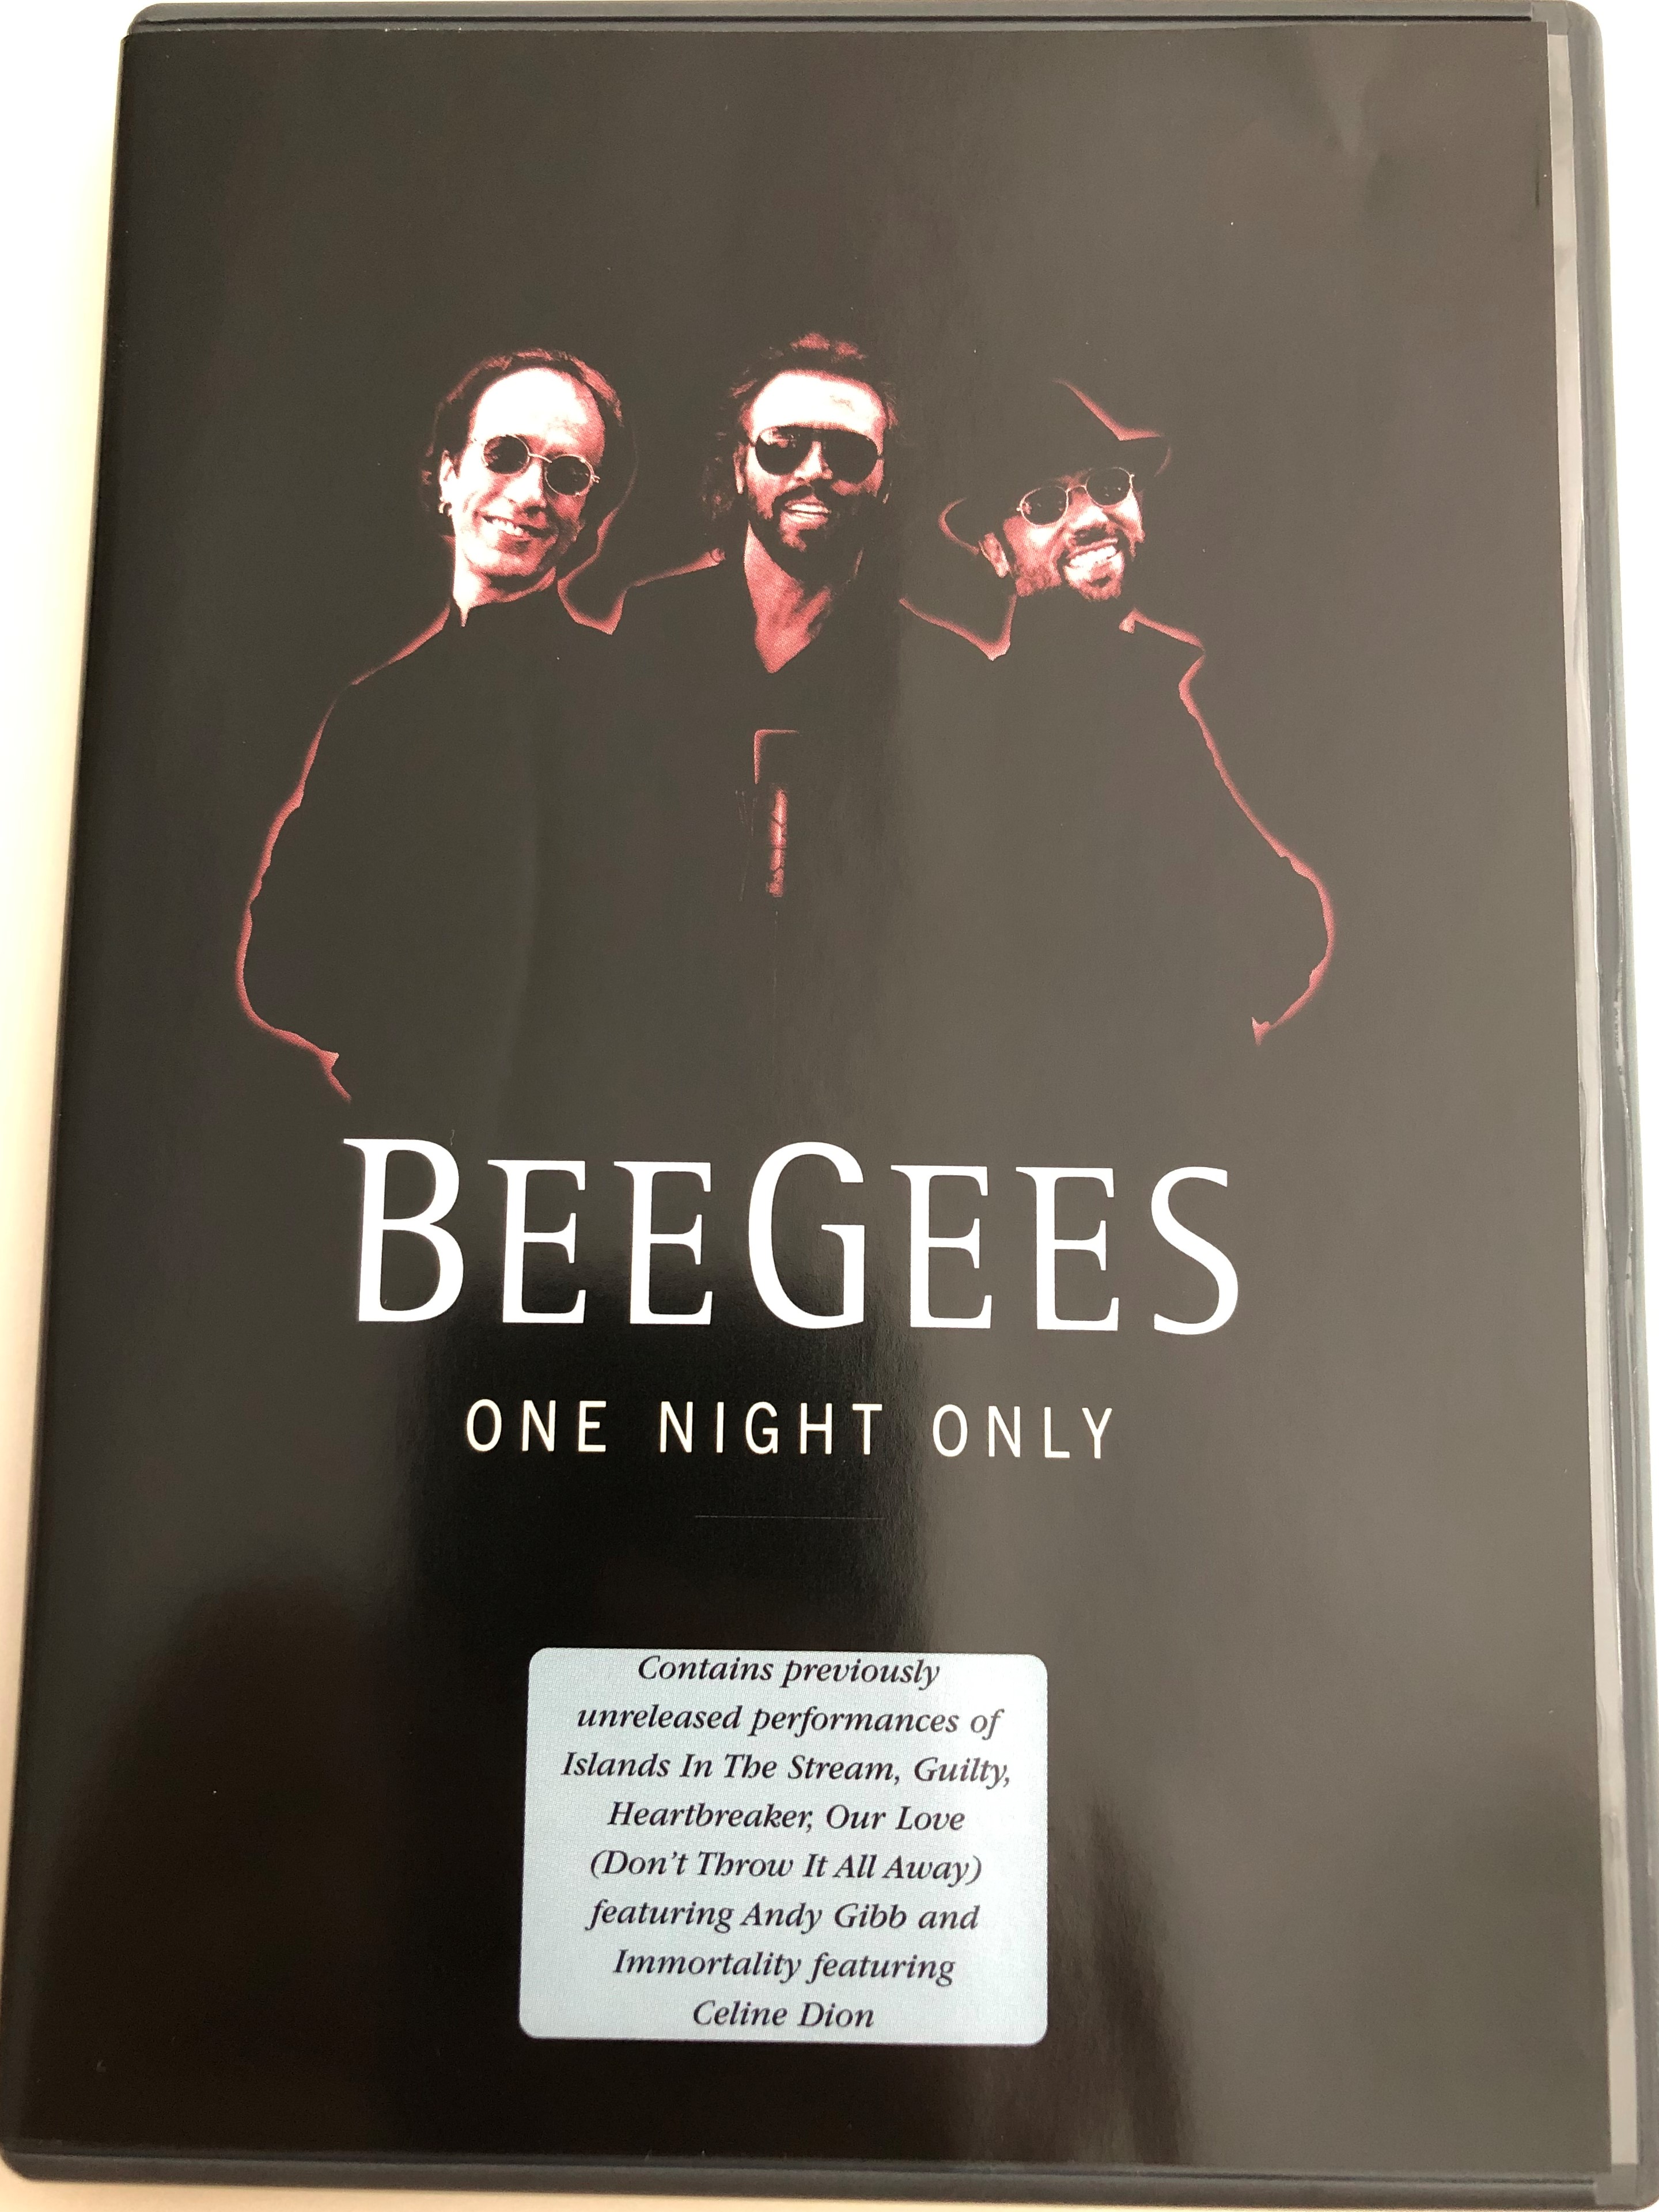 Bee Gees - One night Only DVD 1997 / Contains previously unreleased  performances of Islands In the Sream, Guilty, Heartbreaker ft. Andy Gibb,  Immortality ft. Celine Dion / ERED038 - Bible in My Language